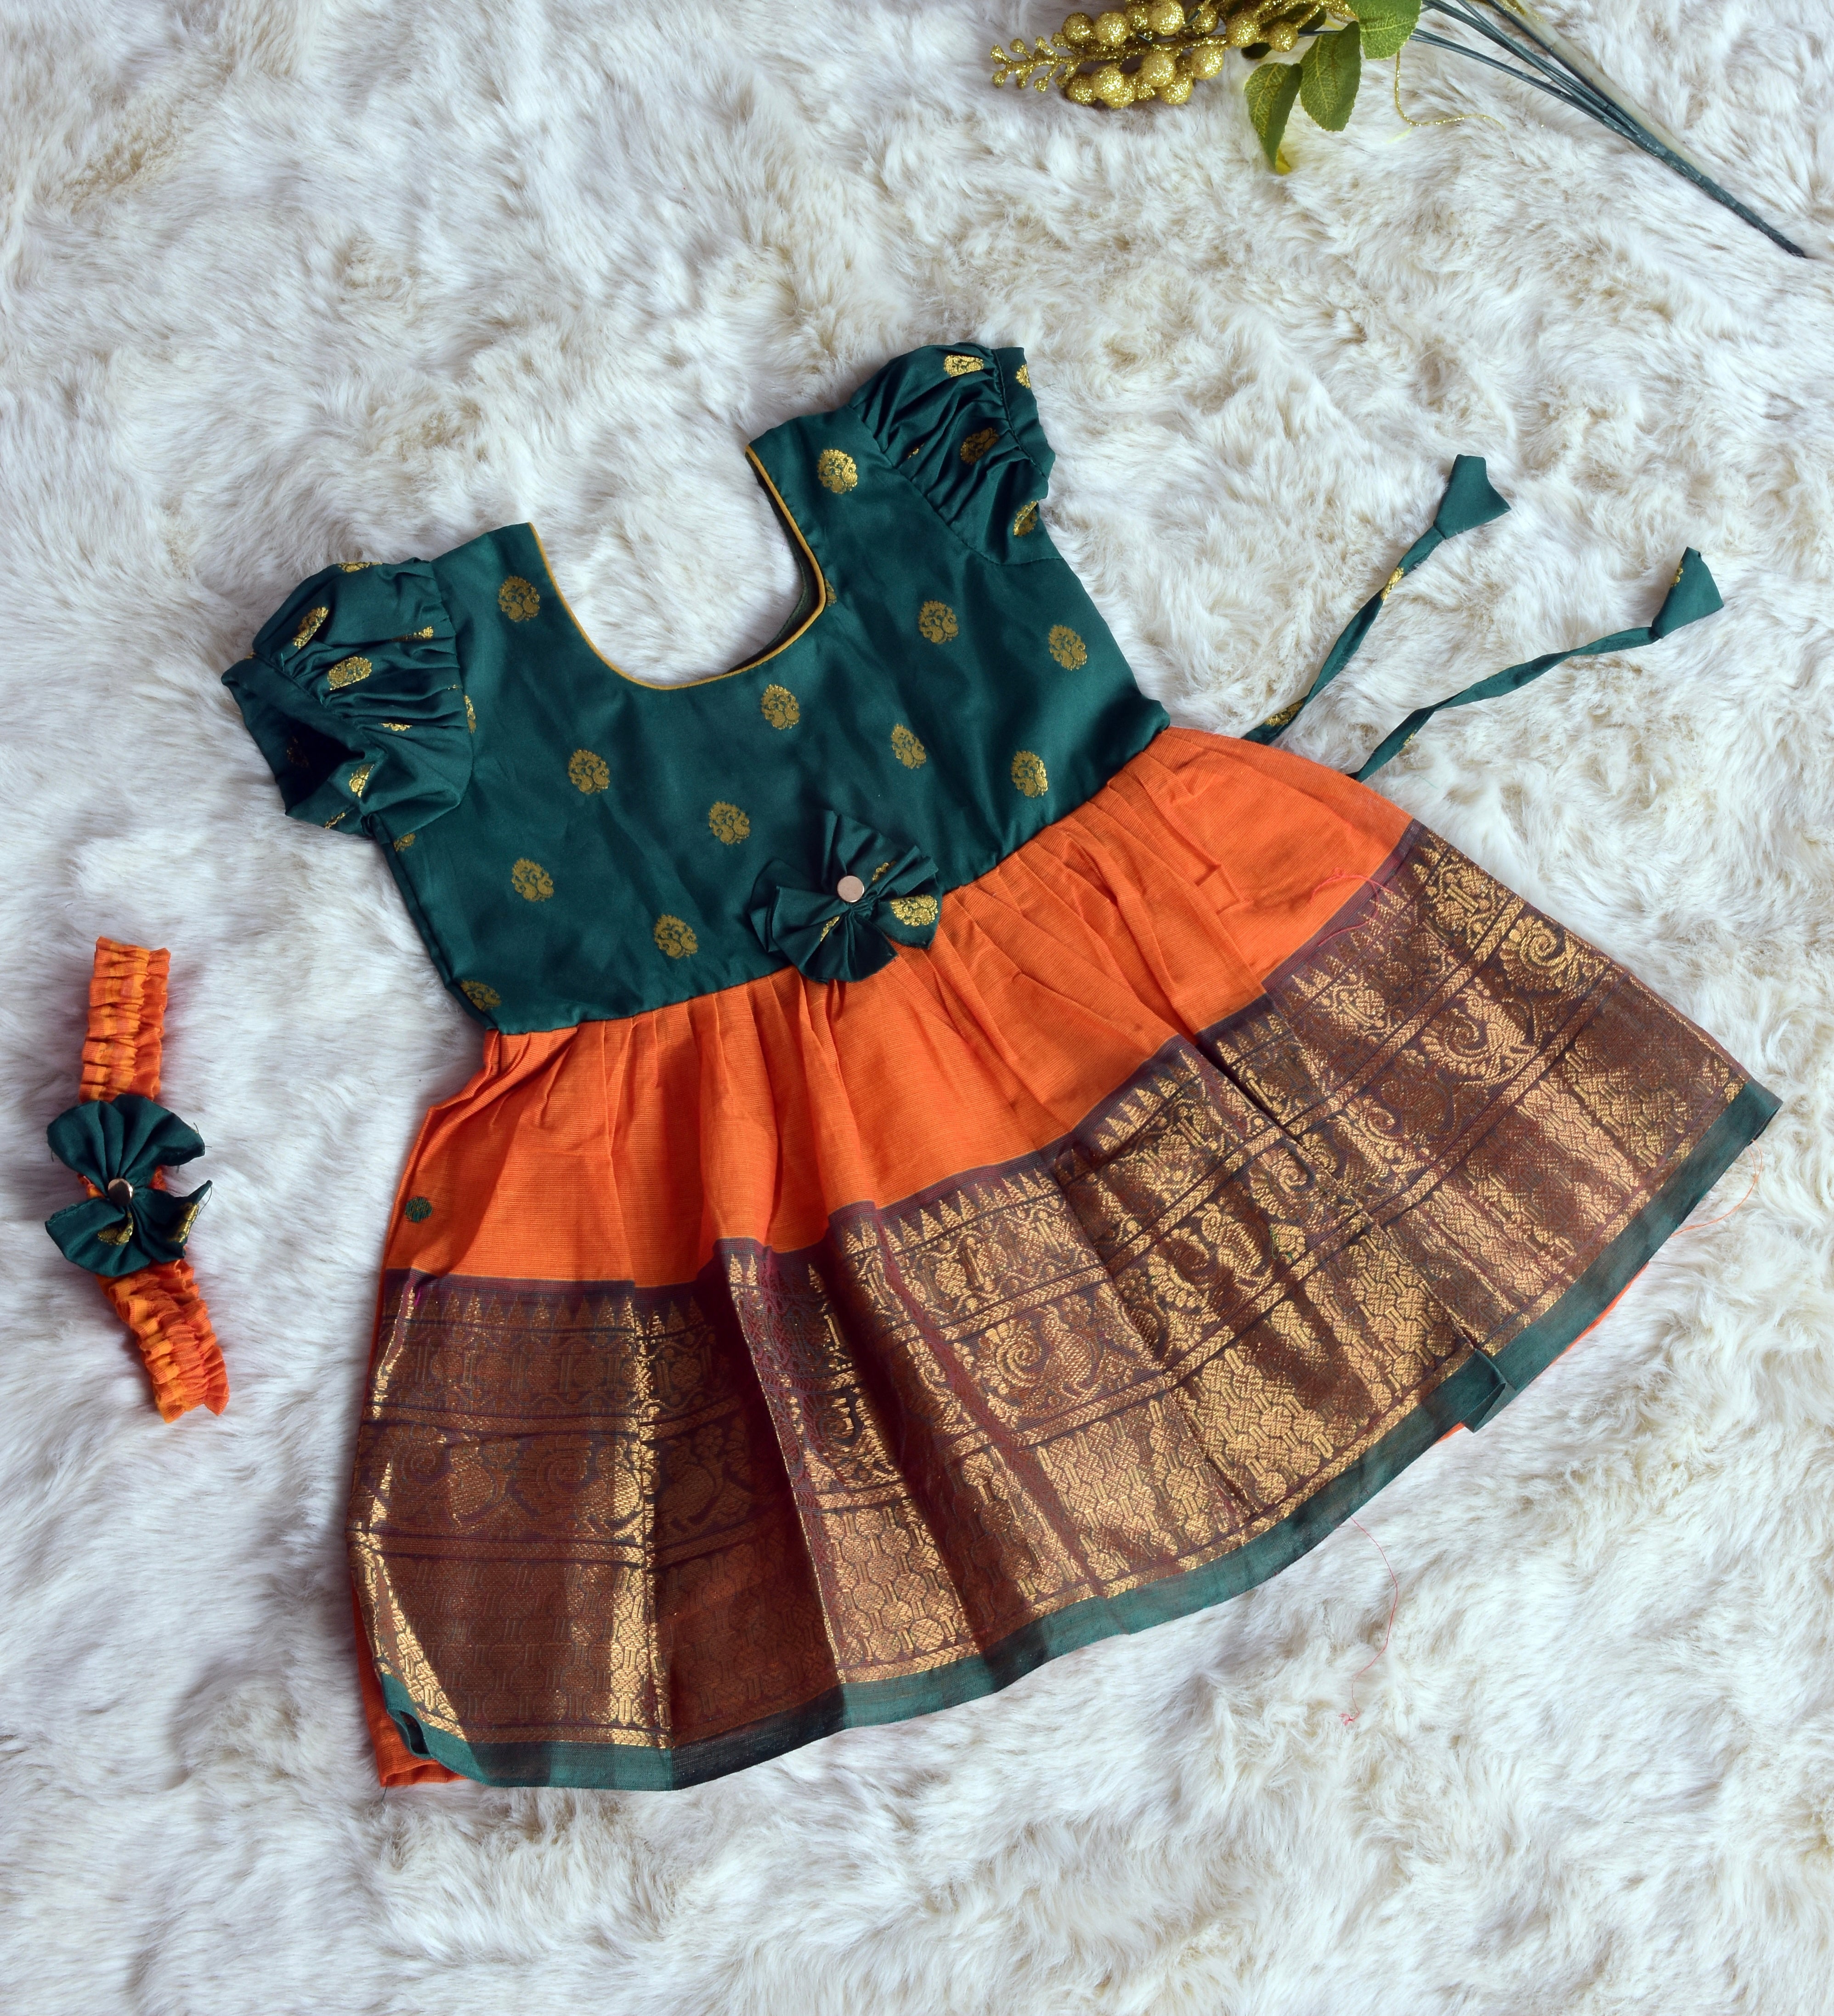 Festive Orange with bottle green (Vintage Bow) Big Border - Kanchi Cotton Silk South Indian Ethnic Frock for Baby Girl